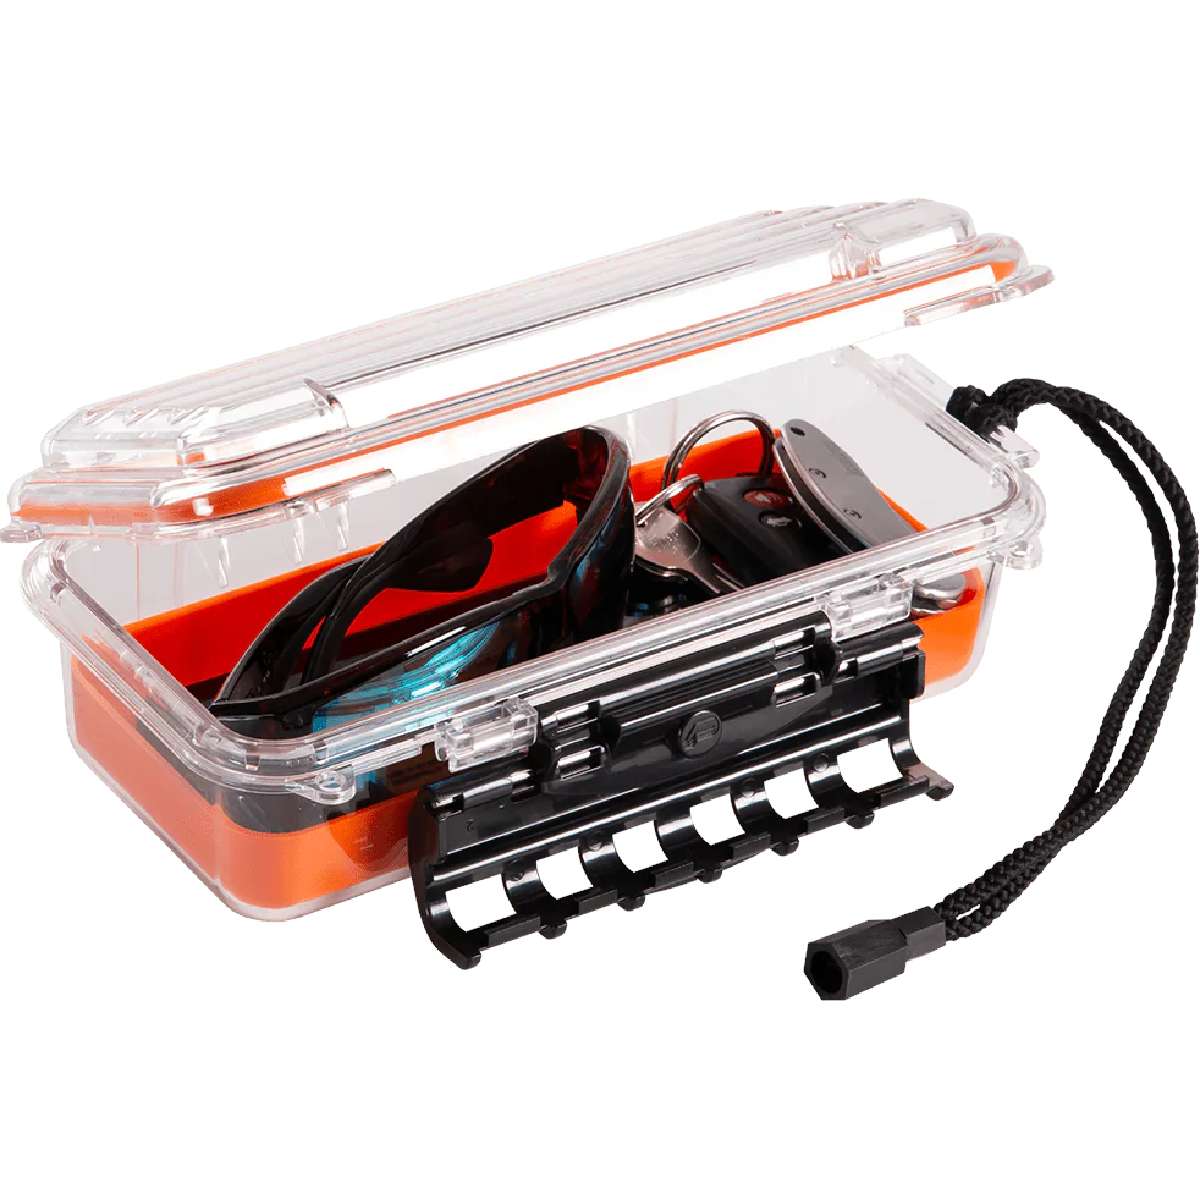 Plano 1450-00 145000 Small Polycarbonate Waterproof Case